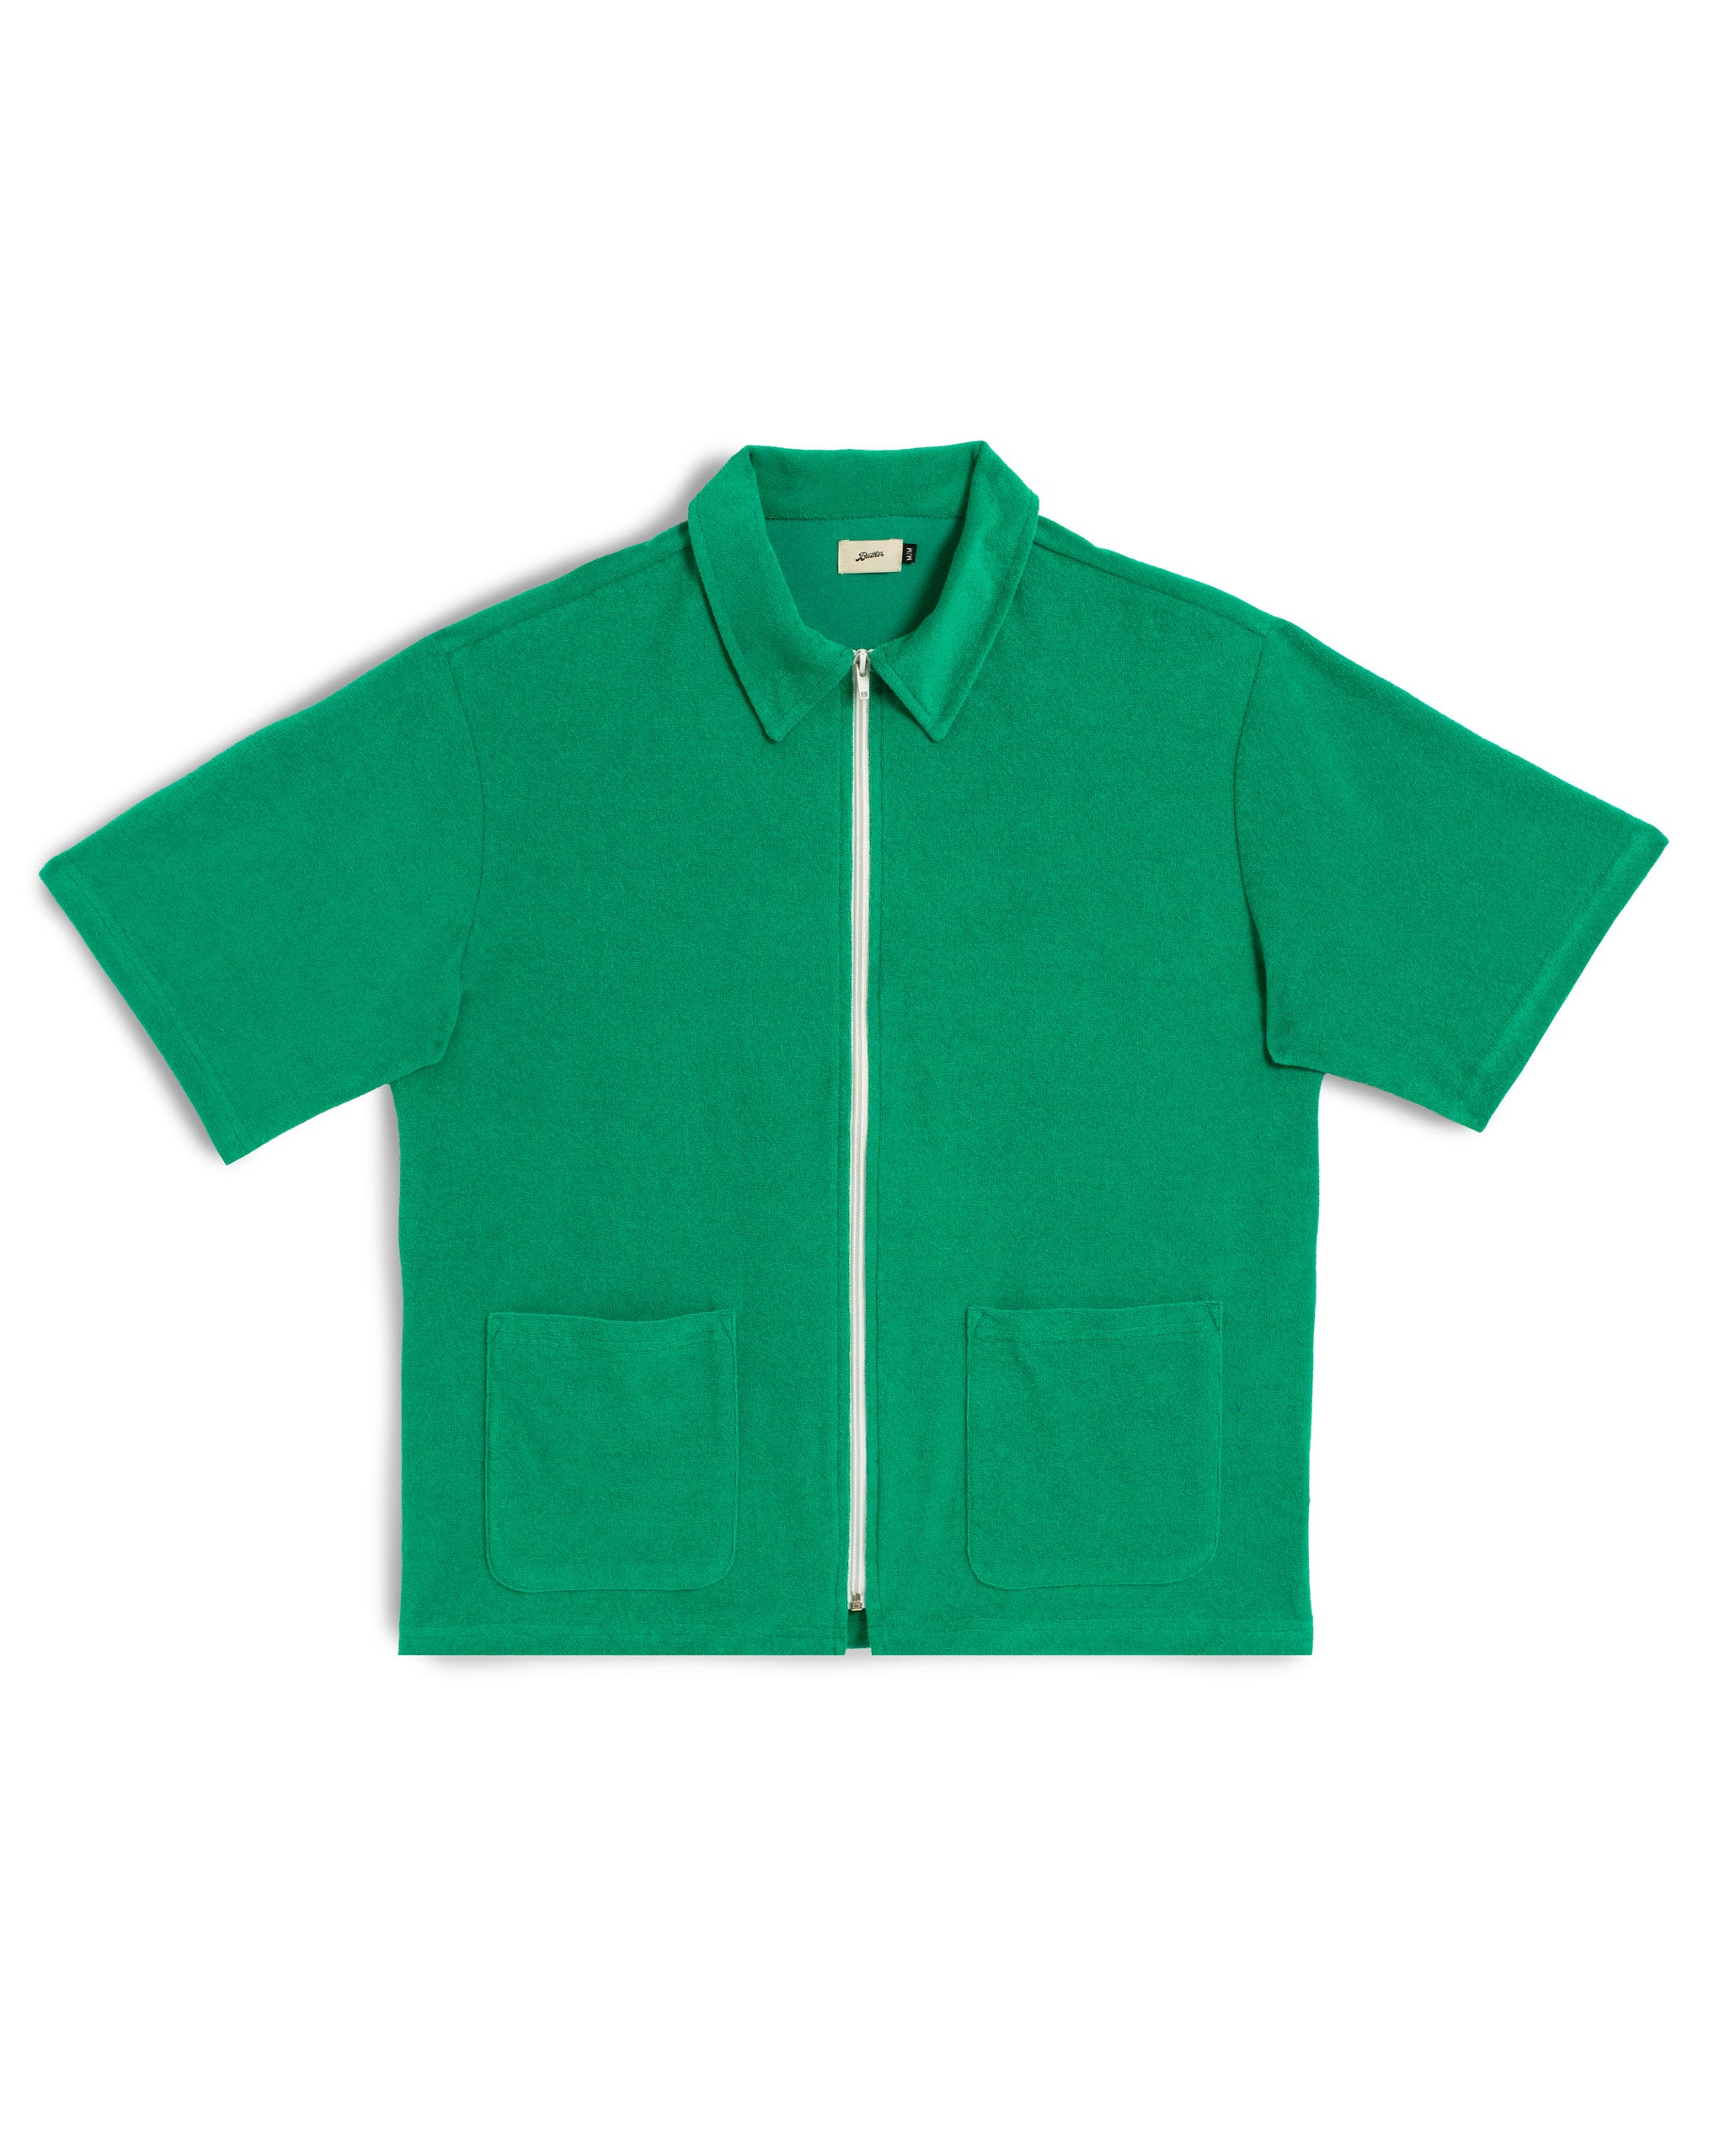 Solid Green Towel Terry Cotton Full Zip Polo Shirt